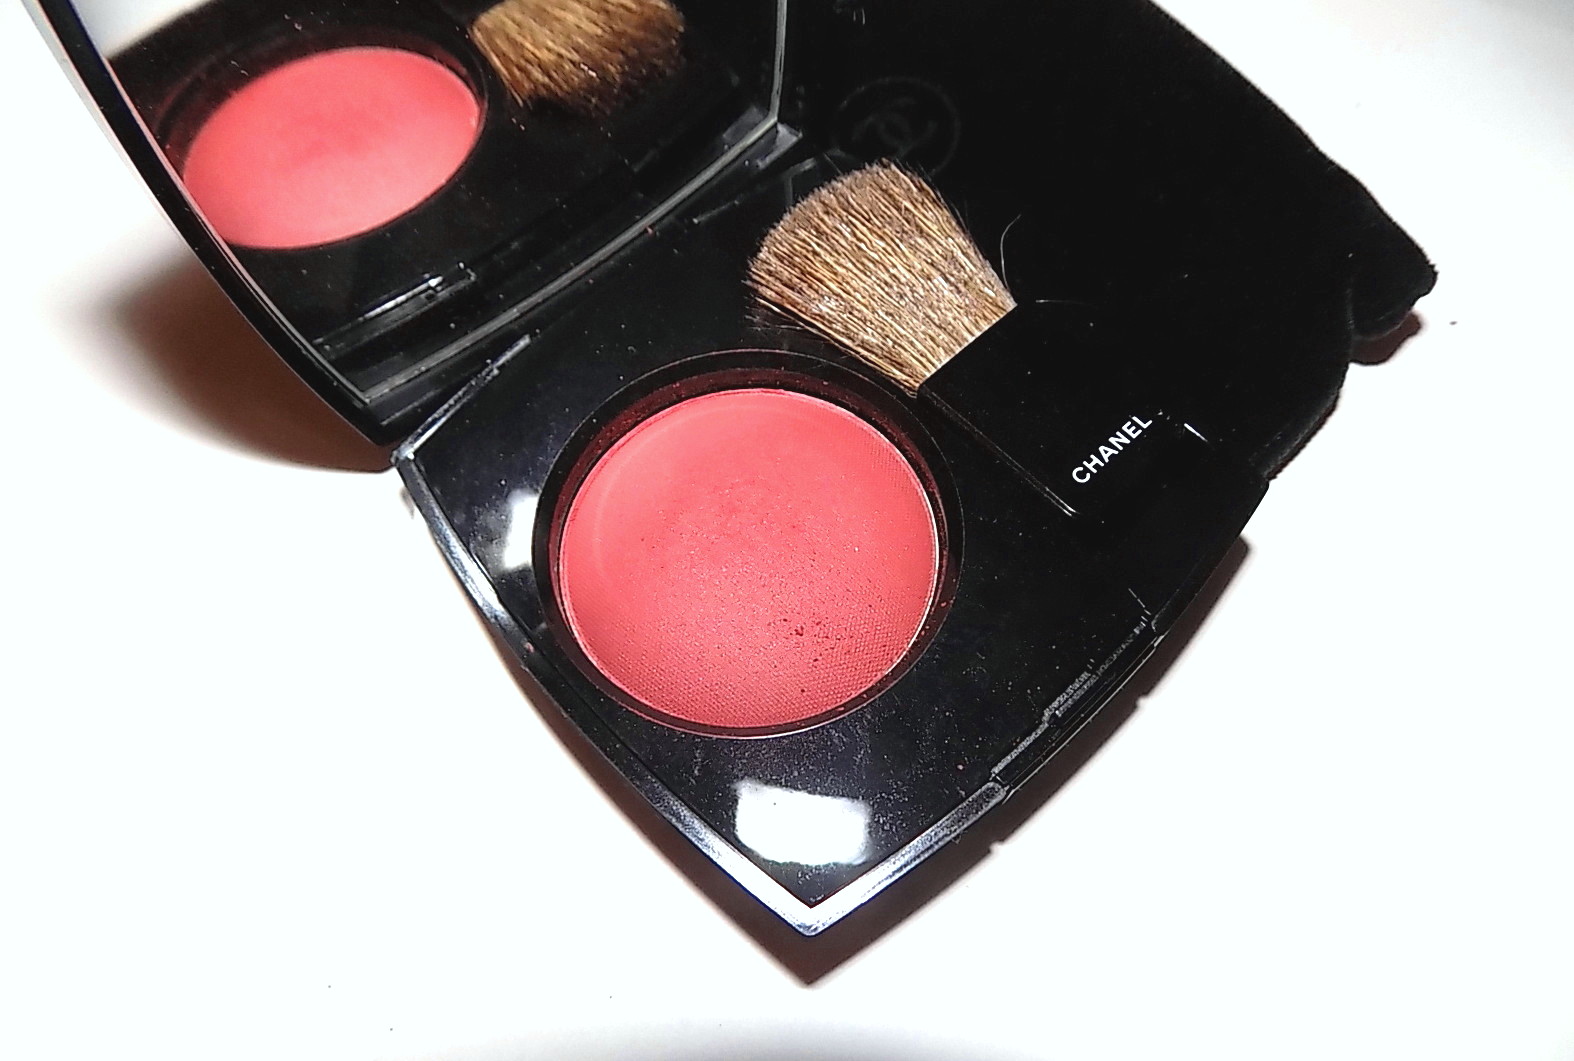 Chanel Joues Contraste Blush • Blush Review & Swatches